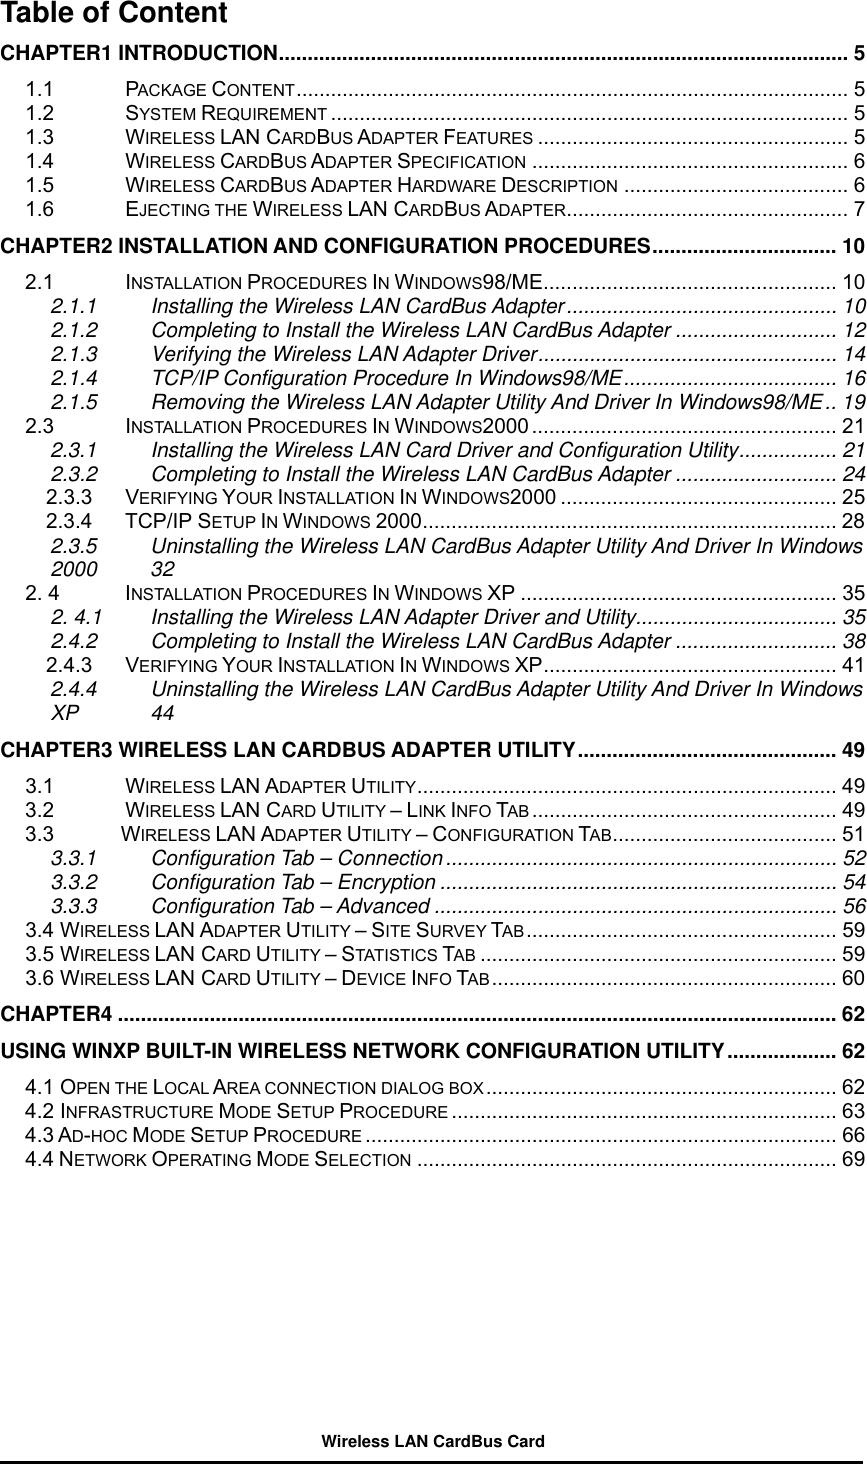 Table of Content CHAPTER1 INTRODUCTION................................................................................................... 5 1.1 PACKAGE CONTENT................................................................................................ 5 1.2 SYSTEM REQUIREMENT .......................................................................................... 5 1.3 WIRELESS LAN CARDBUS ADAPTER FEATURES ...................................................... 5 1.4 WIRELESS CARDBUS ADAPTER SPECIFICATION ....................................................... 6 1.5 WIRELESS CARDBUS ADAPTER HARDWARE DESCRIPTION ....................................... 6 1.6 EJECTING THE WIRELESS LAN CARDBUS ADAPTER................................................. 7 CHAPTER2 INSTALLATION AND CONFIGURATION PROCEDURES................................ 10 2.1 INSTALLATION PROCEDURES IN WINDOWS98/ME................................................... 10 2.1.1   Installing the Wireless LAN CardBus Adapter............................................... 10 2.1.2   Completing to Install the Wireless LAN CardBus Adapter ............................ 12 2.1.3   Verifying the Wireless LAN Adapter Driver.................................................... 14 2.1.4   TCP/IP Configuration Procedure In Windows98/ME..................................... 16 2.1.5   Removing the Wireless LAN Adapter Utility And Driver In Windows98/ME.. 19 2.3 INSTALLATION PROCEDURES IN WINDOWS2000 ..................................................... 21 2.3.1   Installing the Wireless LAN Card Driver and Configuration Utility................. 21 2.3.2   Completing to Install the Wireless LAN CardBus Adapter ............................ 24 2.3.3 VERIFYING YOUR INSTALLATION IN WINDOWS2000 ................................................ 25 2.3.4 TCP/IP SETUP IN WINDOWS 2000........................................................................ 28 2.3.5 Uninstalling the Wireless LAN CardBus Adapter Utility And Driver In Windows 2000 32 2. 4  INSTALLATION PROCEDURES IN WINDOWS XP ....................................................... 35 2. 4.1 Installing the Wireless LAN Adapter Driver and Utility................................... 35 2.4.2   Completing to Install the Wireless LAN CardBus Adapter ............................ 38 2.4.3 VERIFYING YOUR INSTALLATION IN WINDOWS XP................................................... 41 2.4.4 Uninstalling the Wireless LAN CardBus Adapter Utility And Driver In Windows XP 44 CHAPTER3 WIRELESS LAN CARDBUS ADAPTER UTILITY............................................. 49 3.1 WIRELESS LAN ADAPTER UTILITY......................................................................... 49 3.2 WIRELESS LAN CARD UTILITY – LINK INFO TAB ..................................................... 49 3.3        WIRELESS LAN ADAPTER UTILITY – CONFIGURATION TAB....................................... 51 3.3.1 Configuration Tab – Connection .................................................................... 52 3.3.2 Configuration Tab – Encryption ..................................................................... 54 3.3.3 Configuration Tab – Advanced ...................................................................... 56 3.4 WIRELESS LAN ADAPTER UTILITY – SITE SURVEY TAB ...................................................... 59 3.5 WIRELESS LAN CARD UTILITY – STATISTICS TAB .............................................................. 59 3.6 WIRELESS LAN CARD UTILITY – DEVICE INFO TAB ............................................................ 60 CHAPTER4 ............................................................................................................................. 62 USING WINXP BUILT-IN WIRELESS NETWORK CONFIGURATION UTILITY................... 62 4.1 OPEN THE LOCAL AREA CONNECTION DIALOG BOX............................................................. 62 4.2 INFRASTRUCTURE MODE SETUP PROCEDURE ................................................................... 63 4.3 AD-HOC MODE SETUP PROCEDURE .................................................................................. 66 4.4 NETWORK OPERATING MODE SELECTION ......................................................................... 69  Wireless LAN CardBus Card 